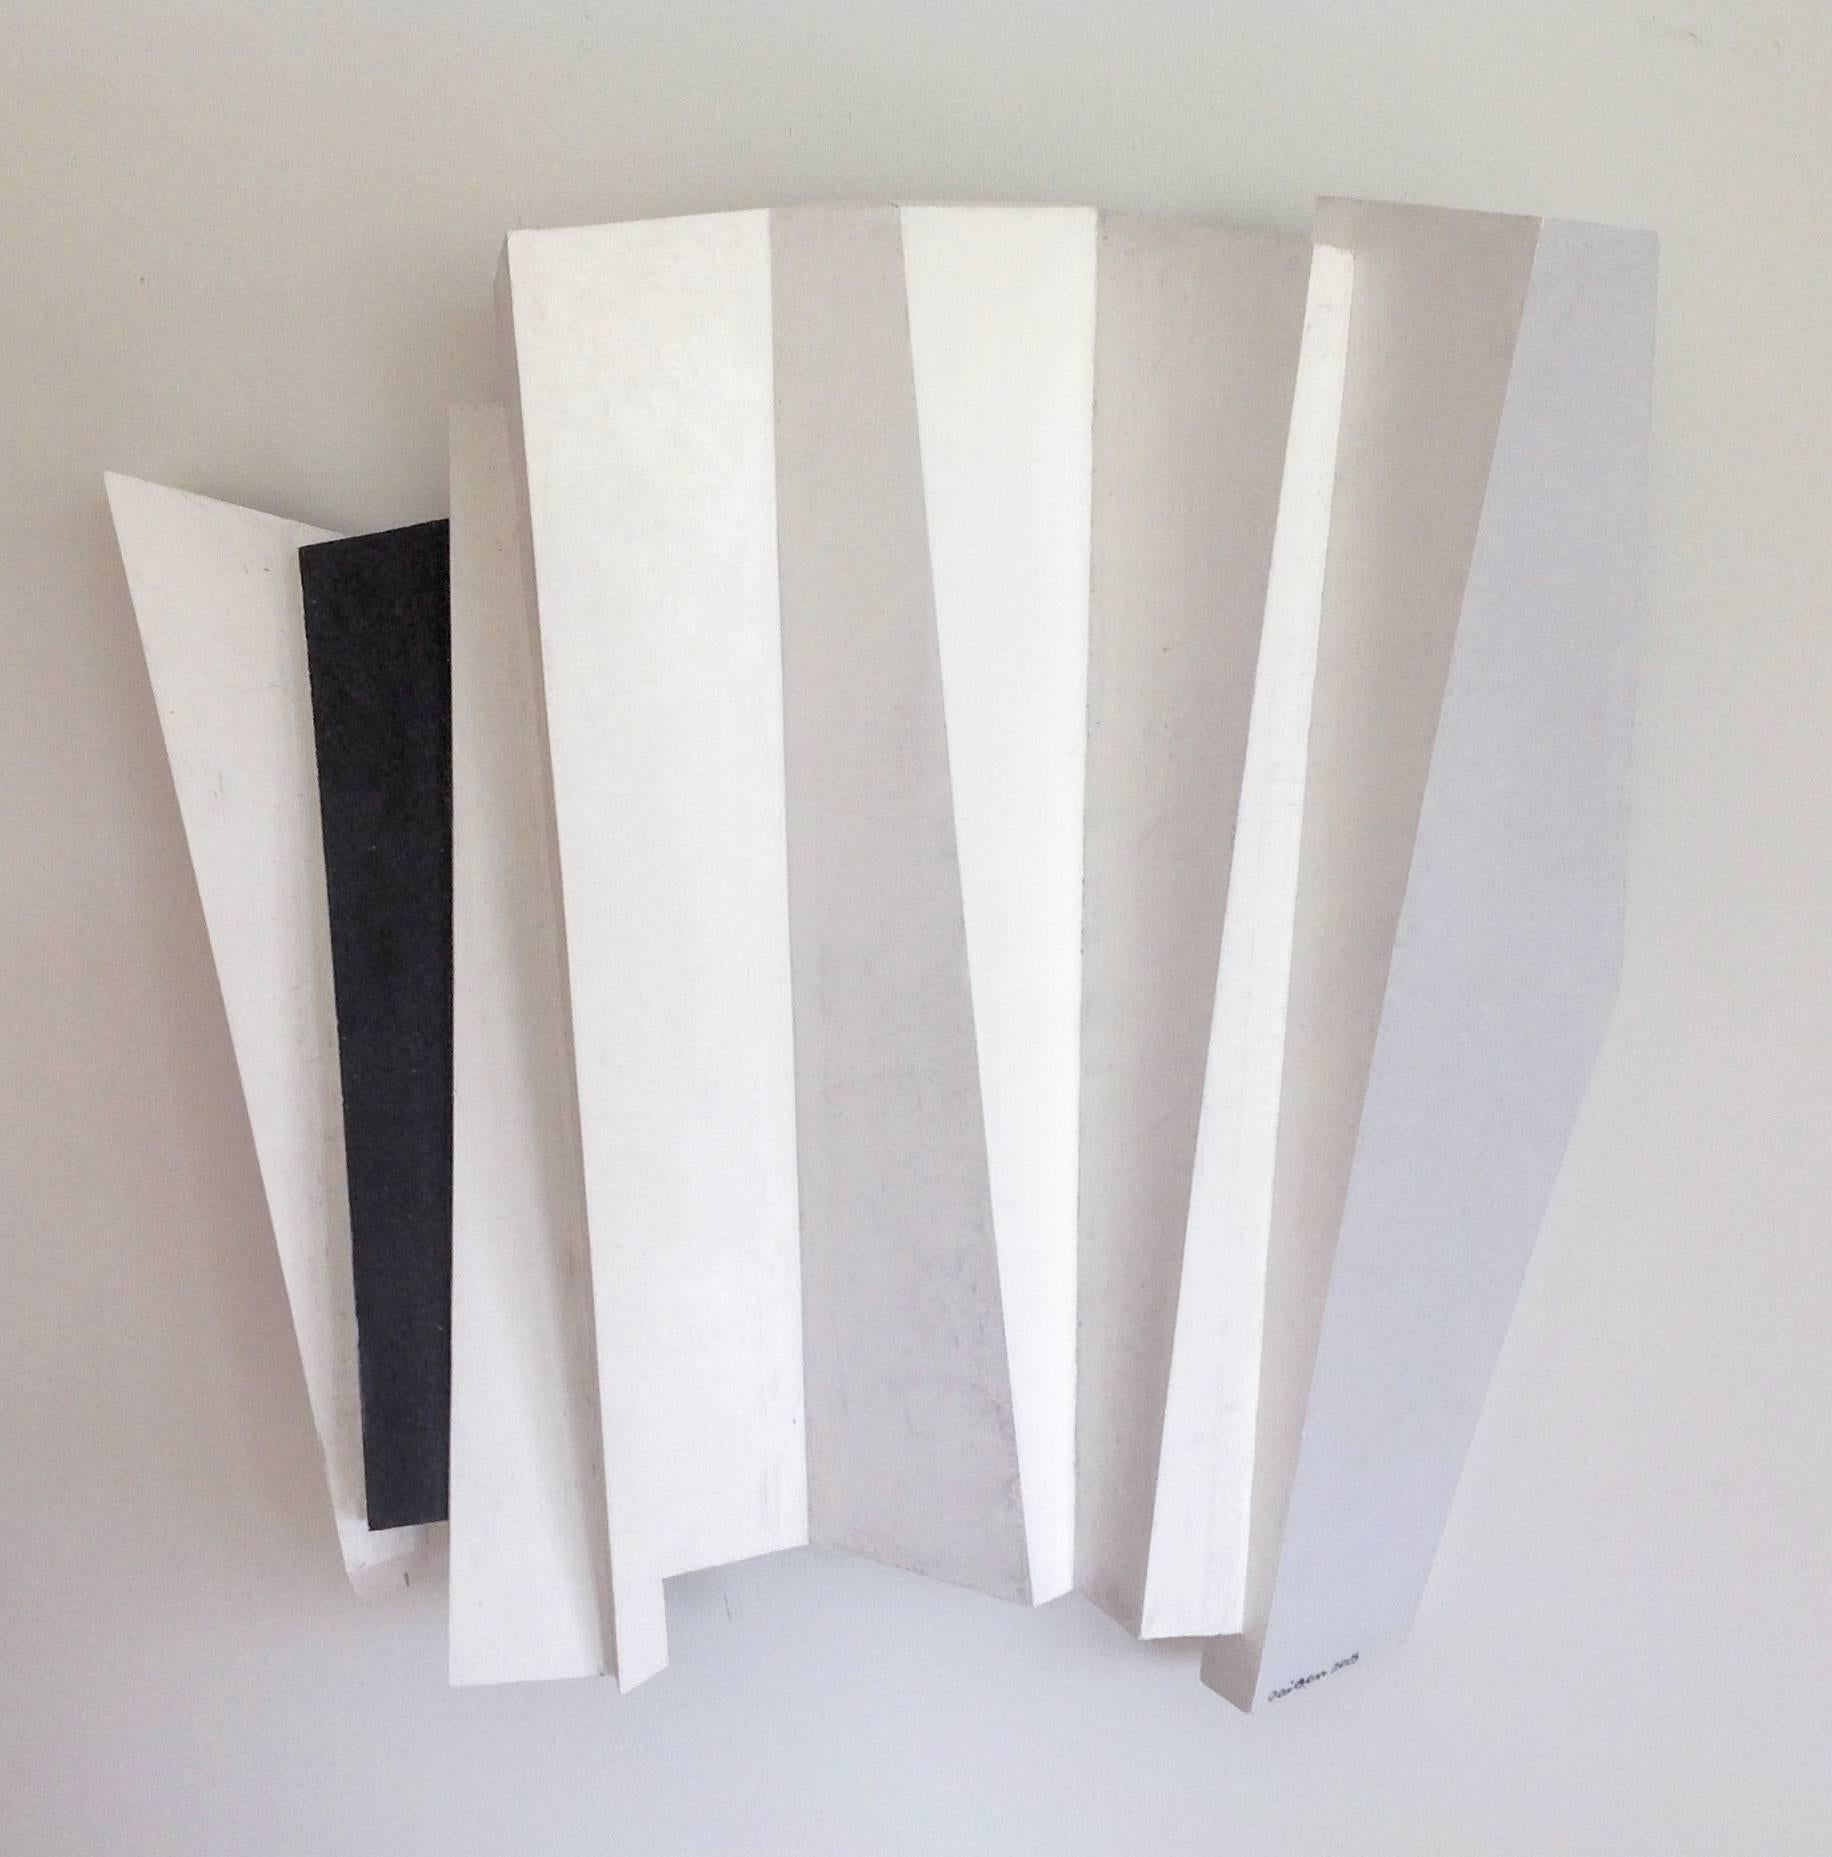 Dai Ban Abstract Sculpture - Piano Has Been Drinking: Black & White Modern Minimalist Abstract Wall Sculpture